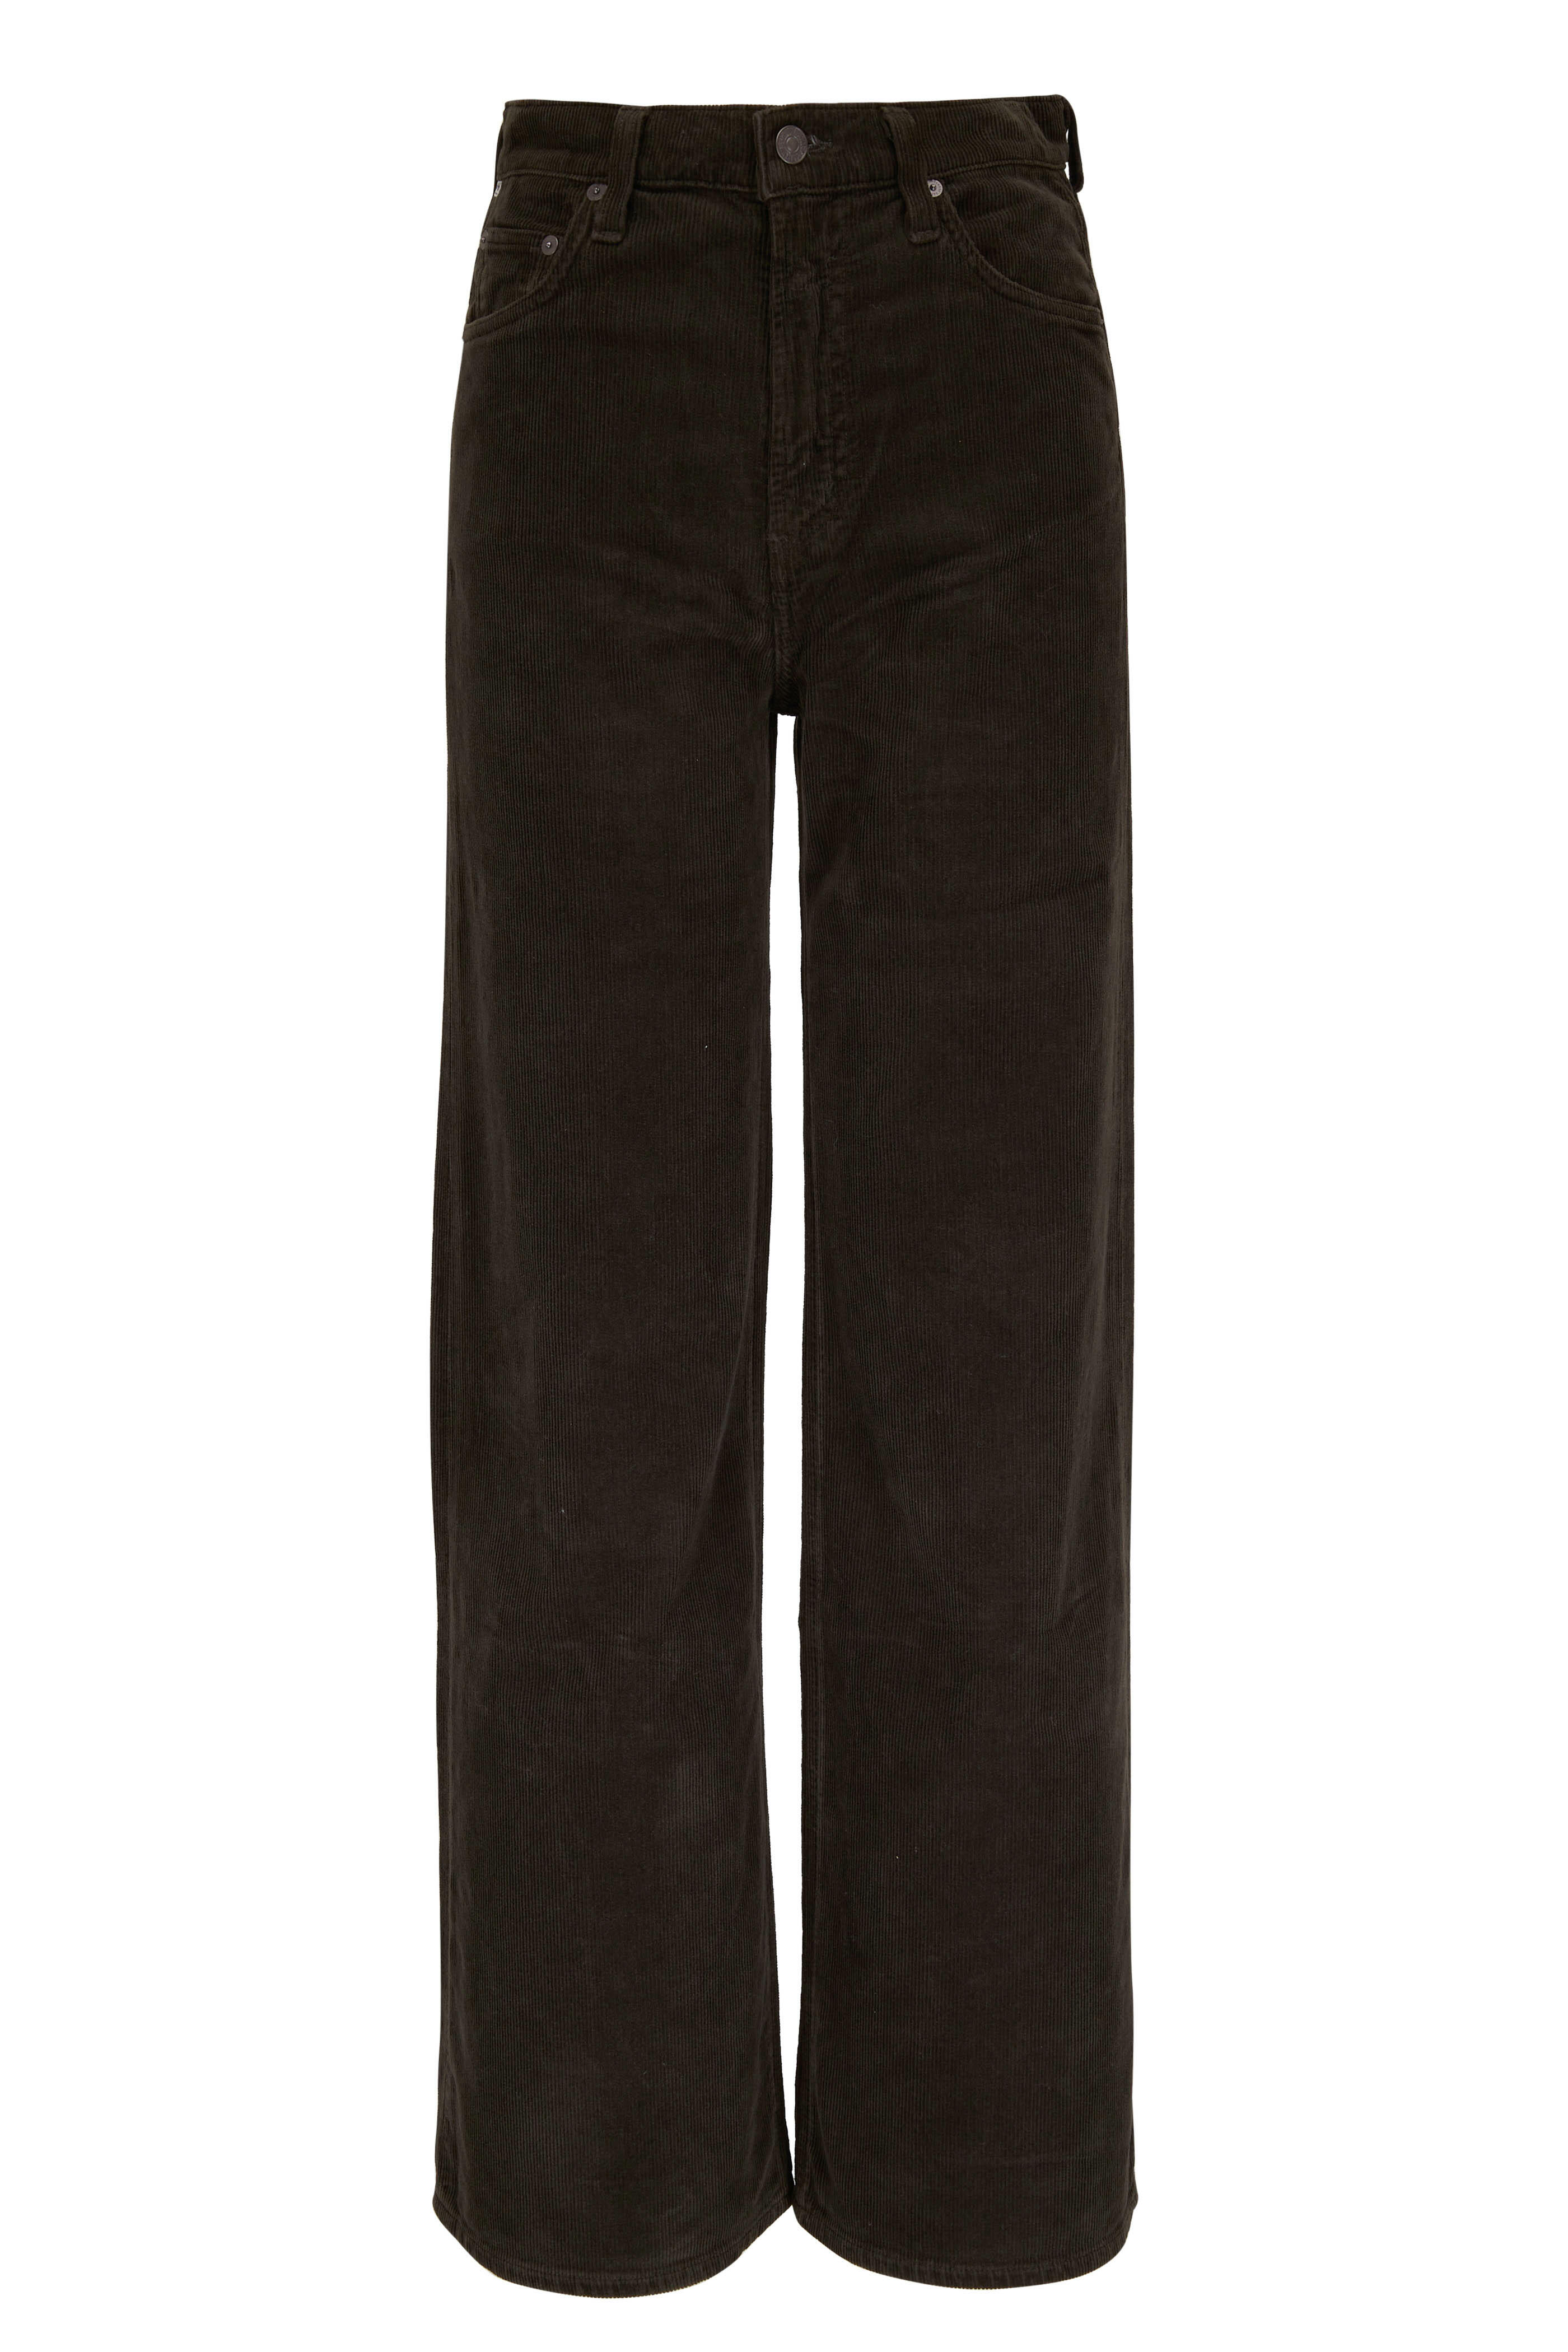 Citizens of Humanity - Paloma Olive Green Corduroy Pant